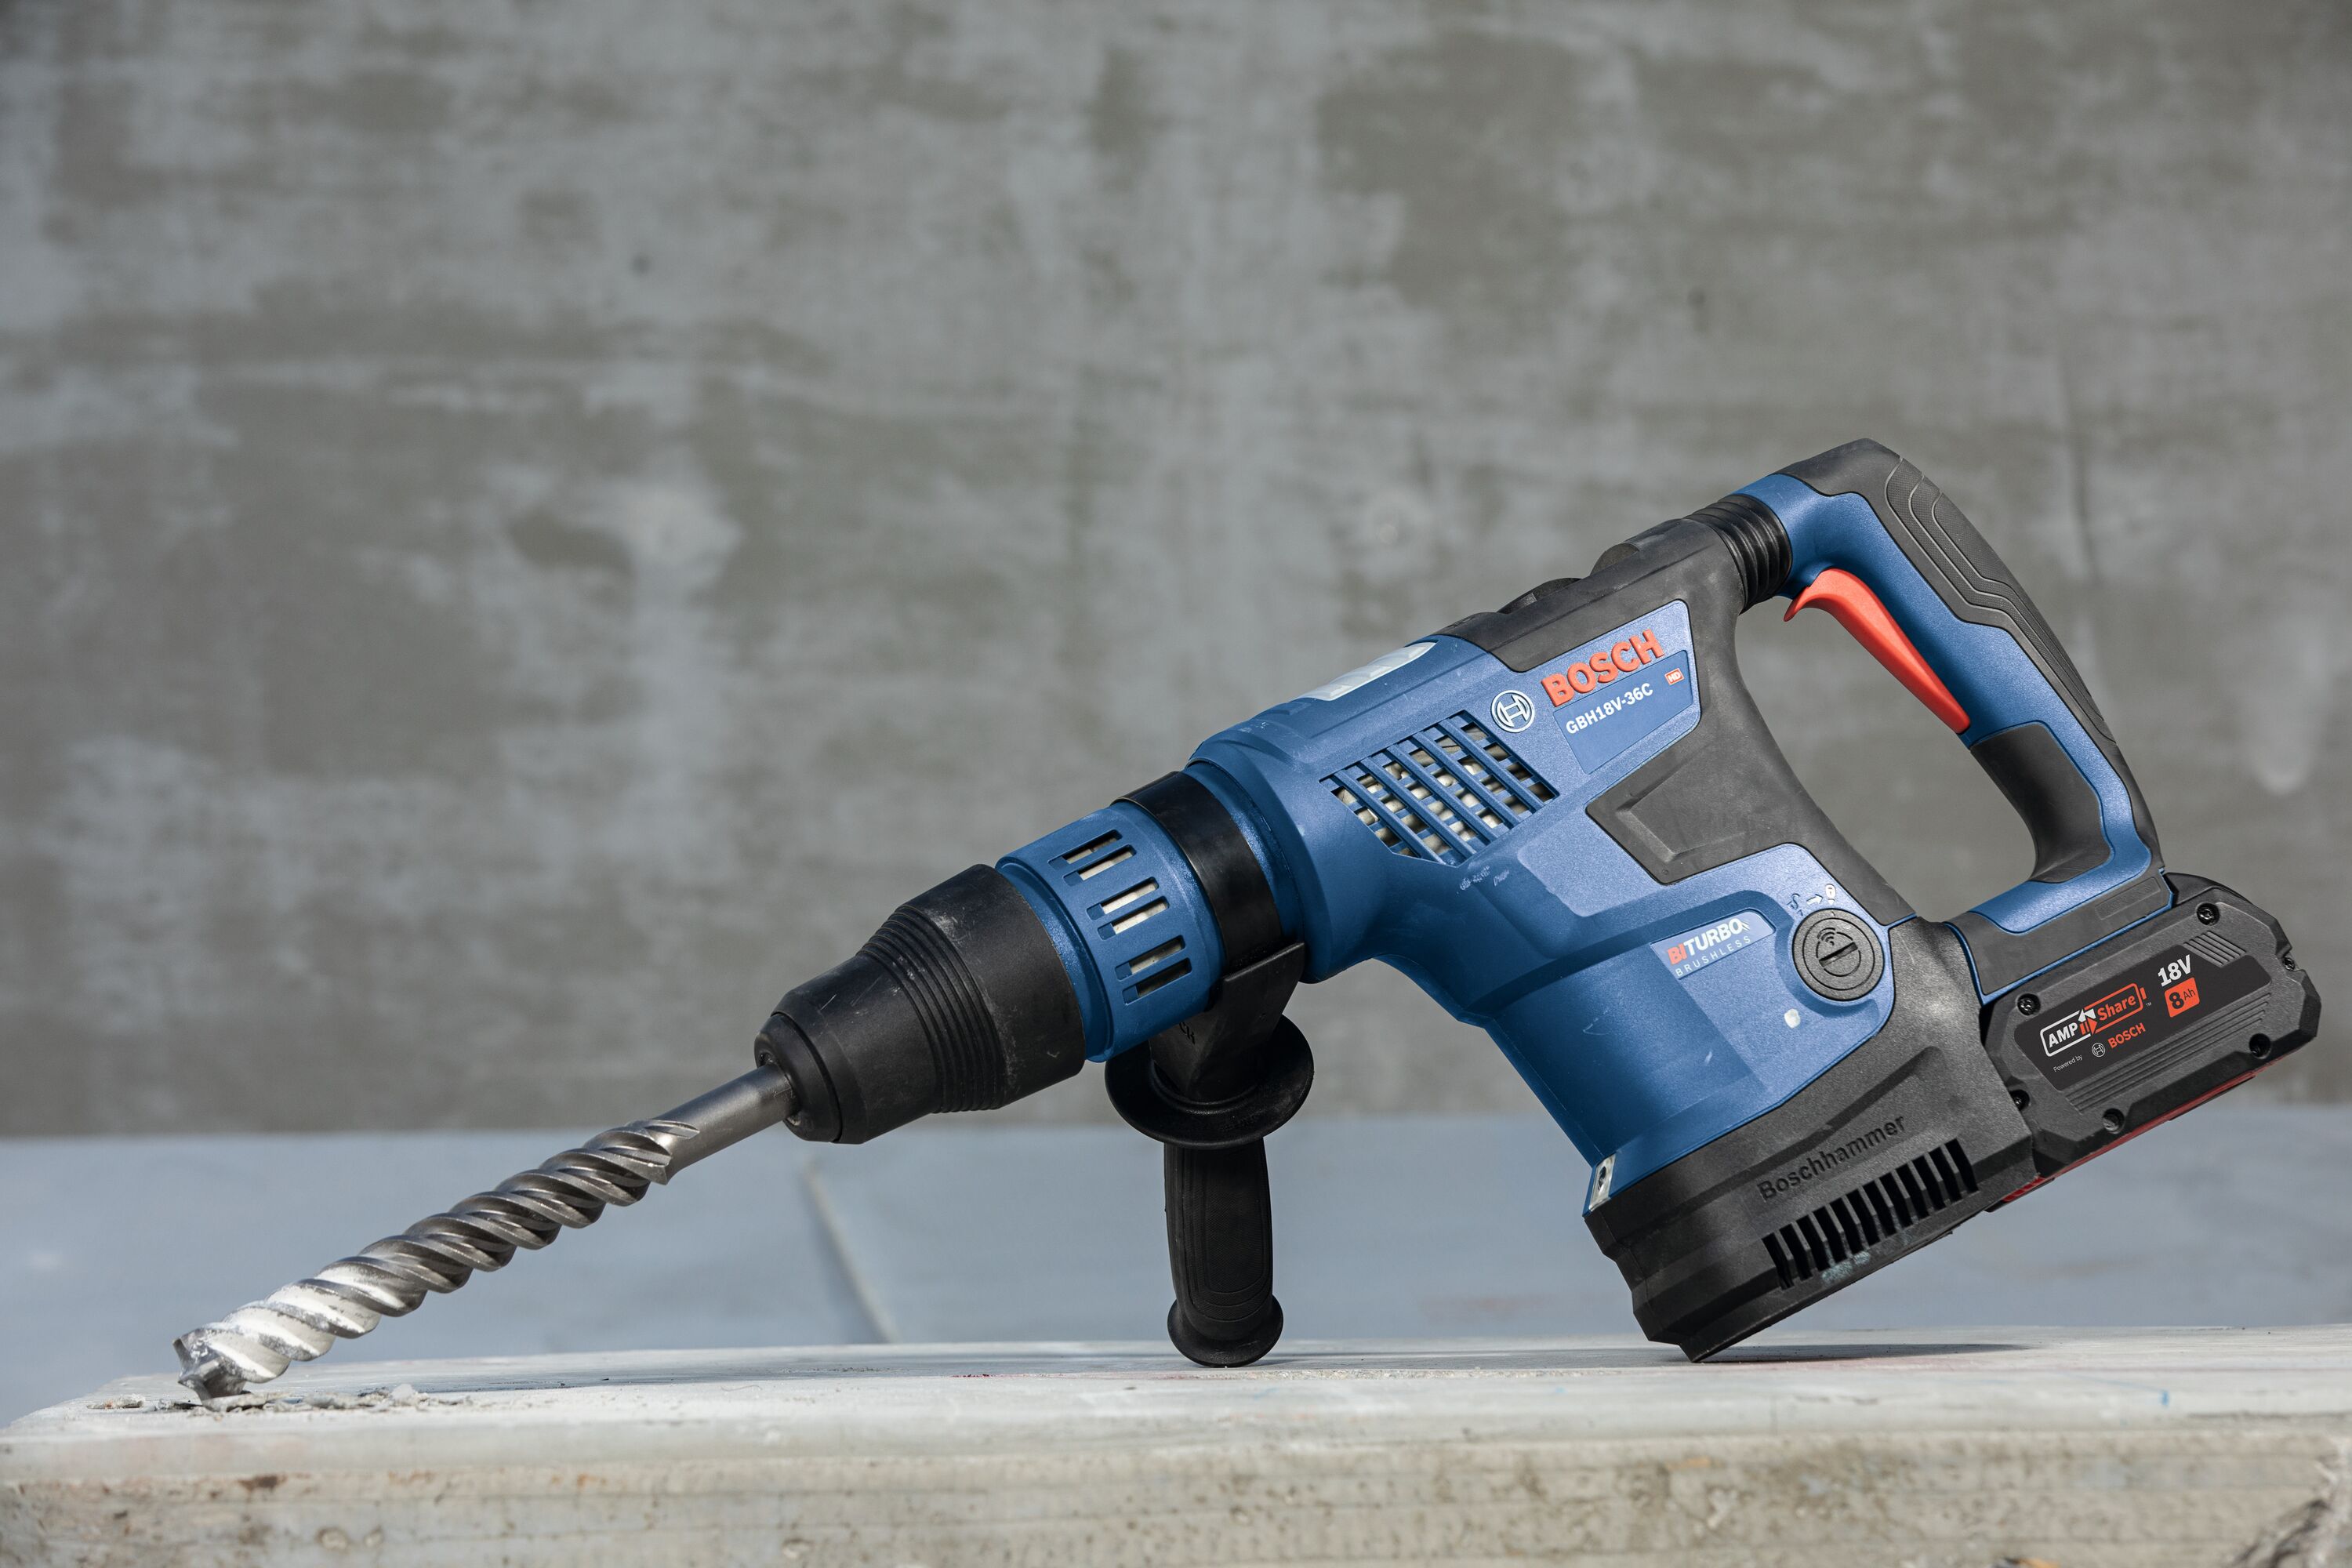 Bosch PROFACTOR 18-volt 8-Amp 1-9/16-in Rotary Sds-max department at Drill Speed in Cordless the Rotary Variable Hammer Drills (Bare Tool) Hammer